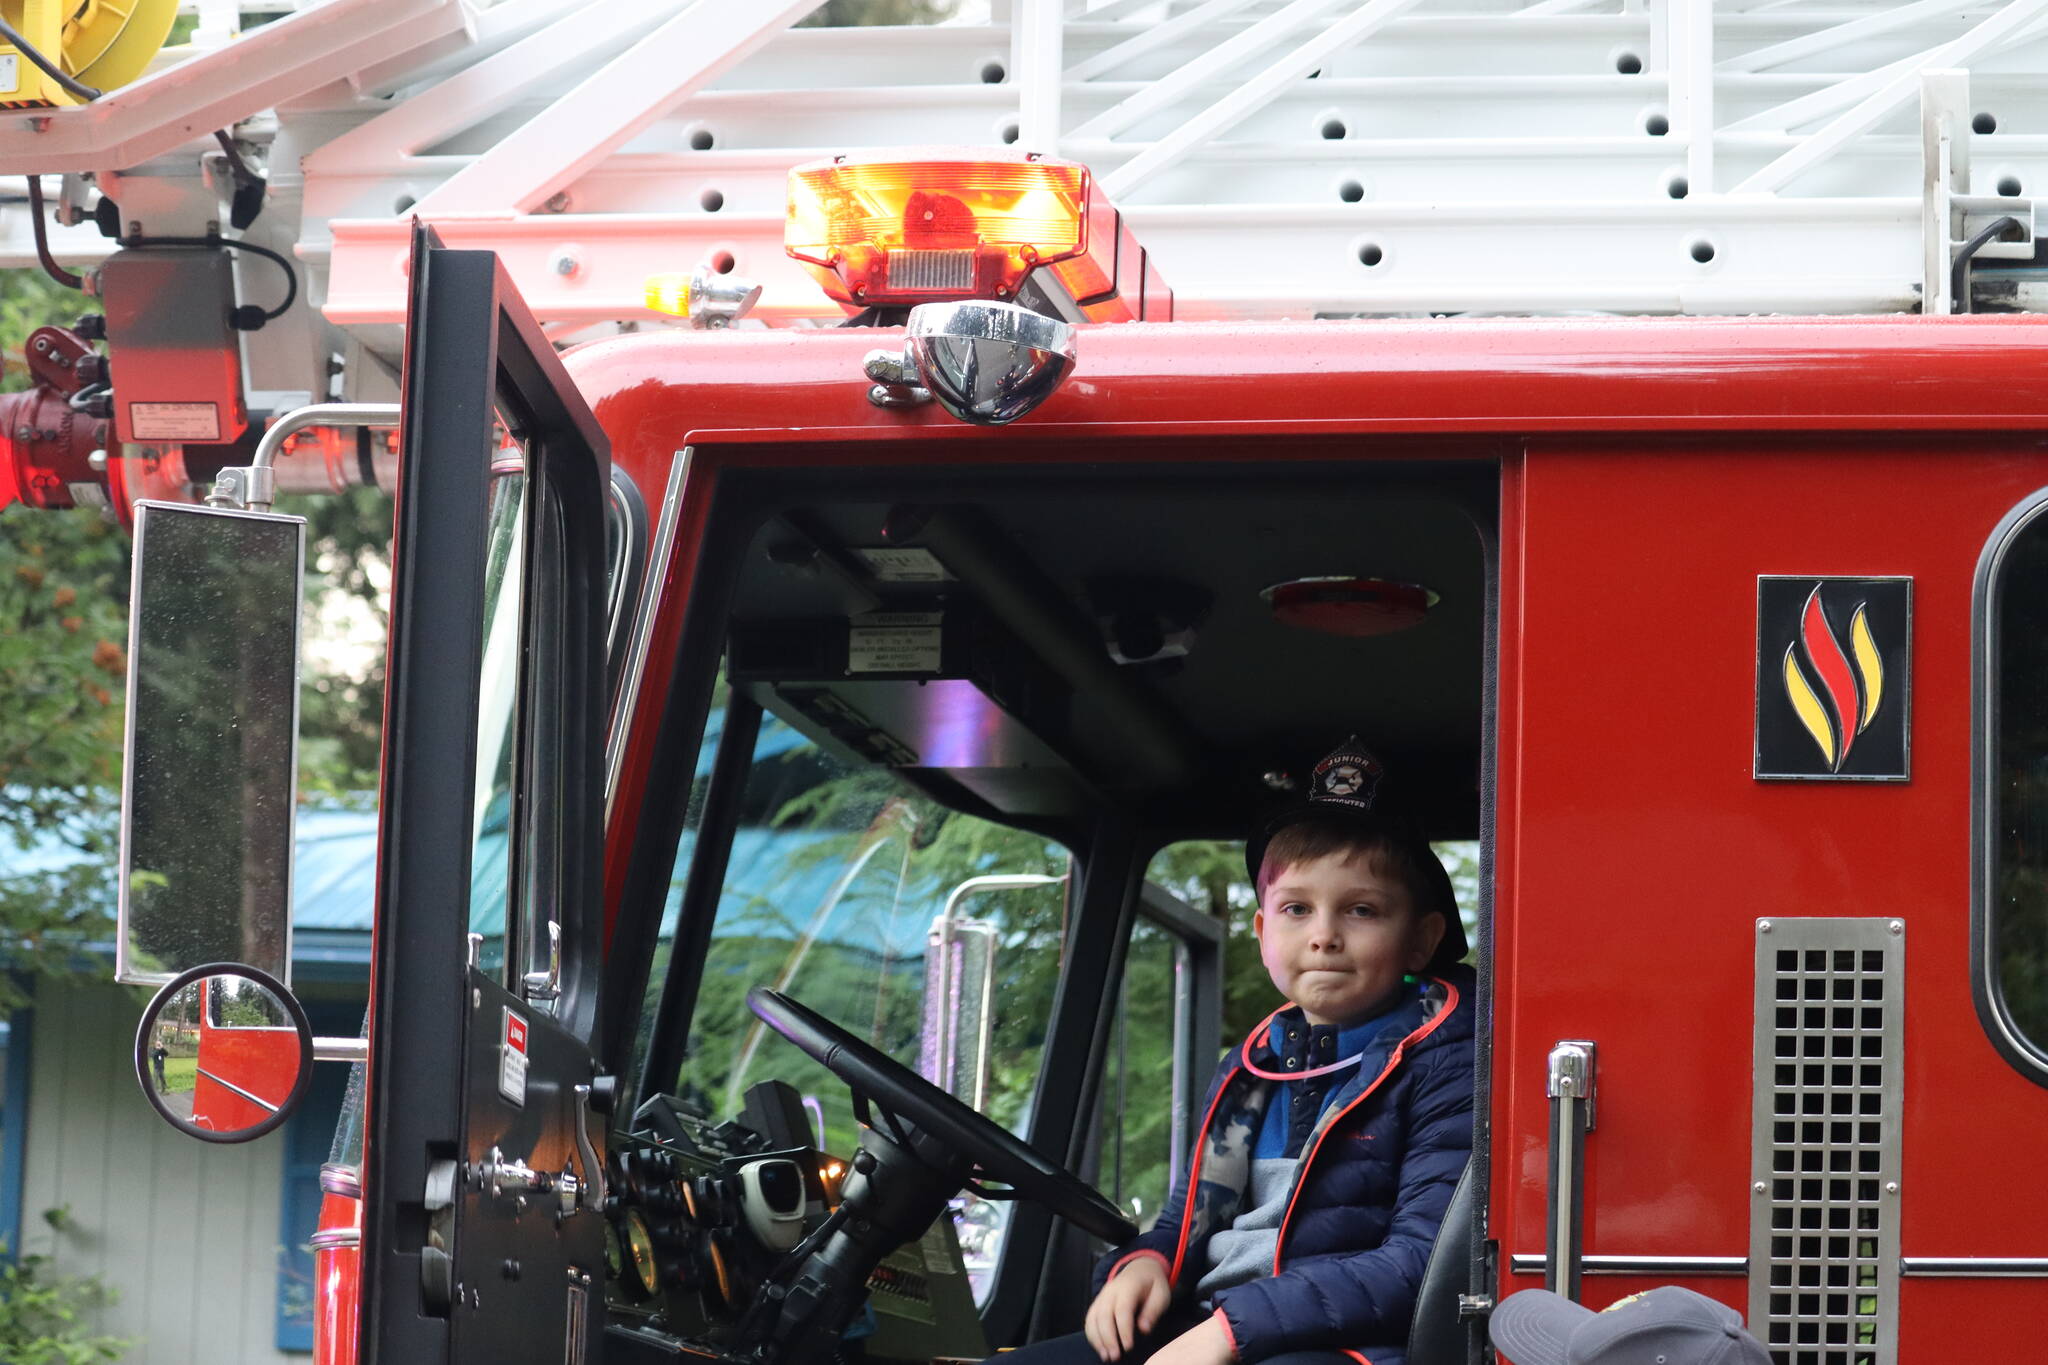 Thomas Gouk poses for photos while seated in the driver’s seat of Capital City Fire/ Rescue’s emergency vehicle. Photo was taken on Skywood Lane. (Jonson Kuhn / Juneau Empire)